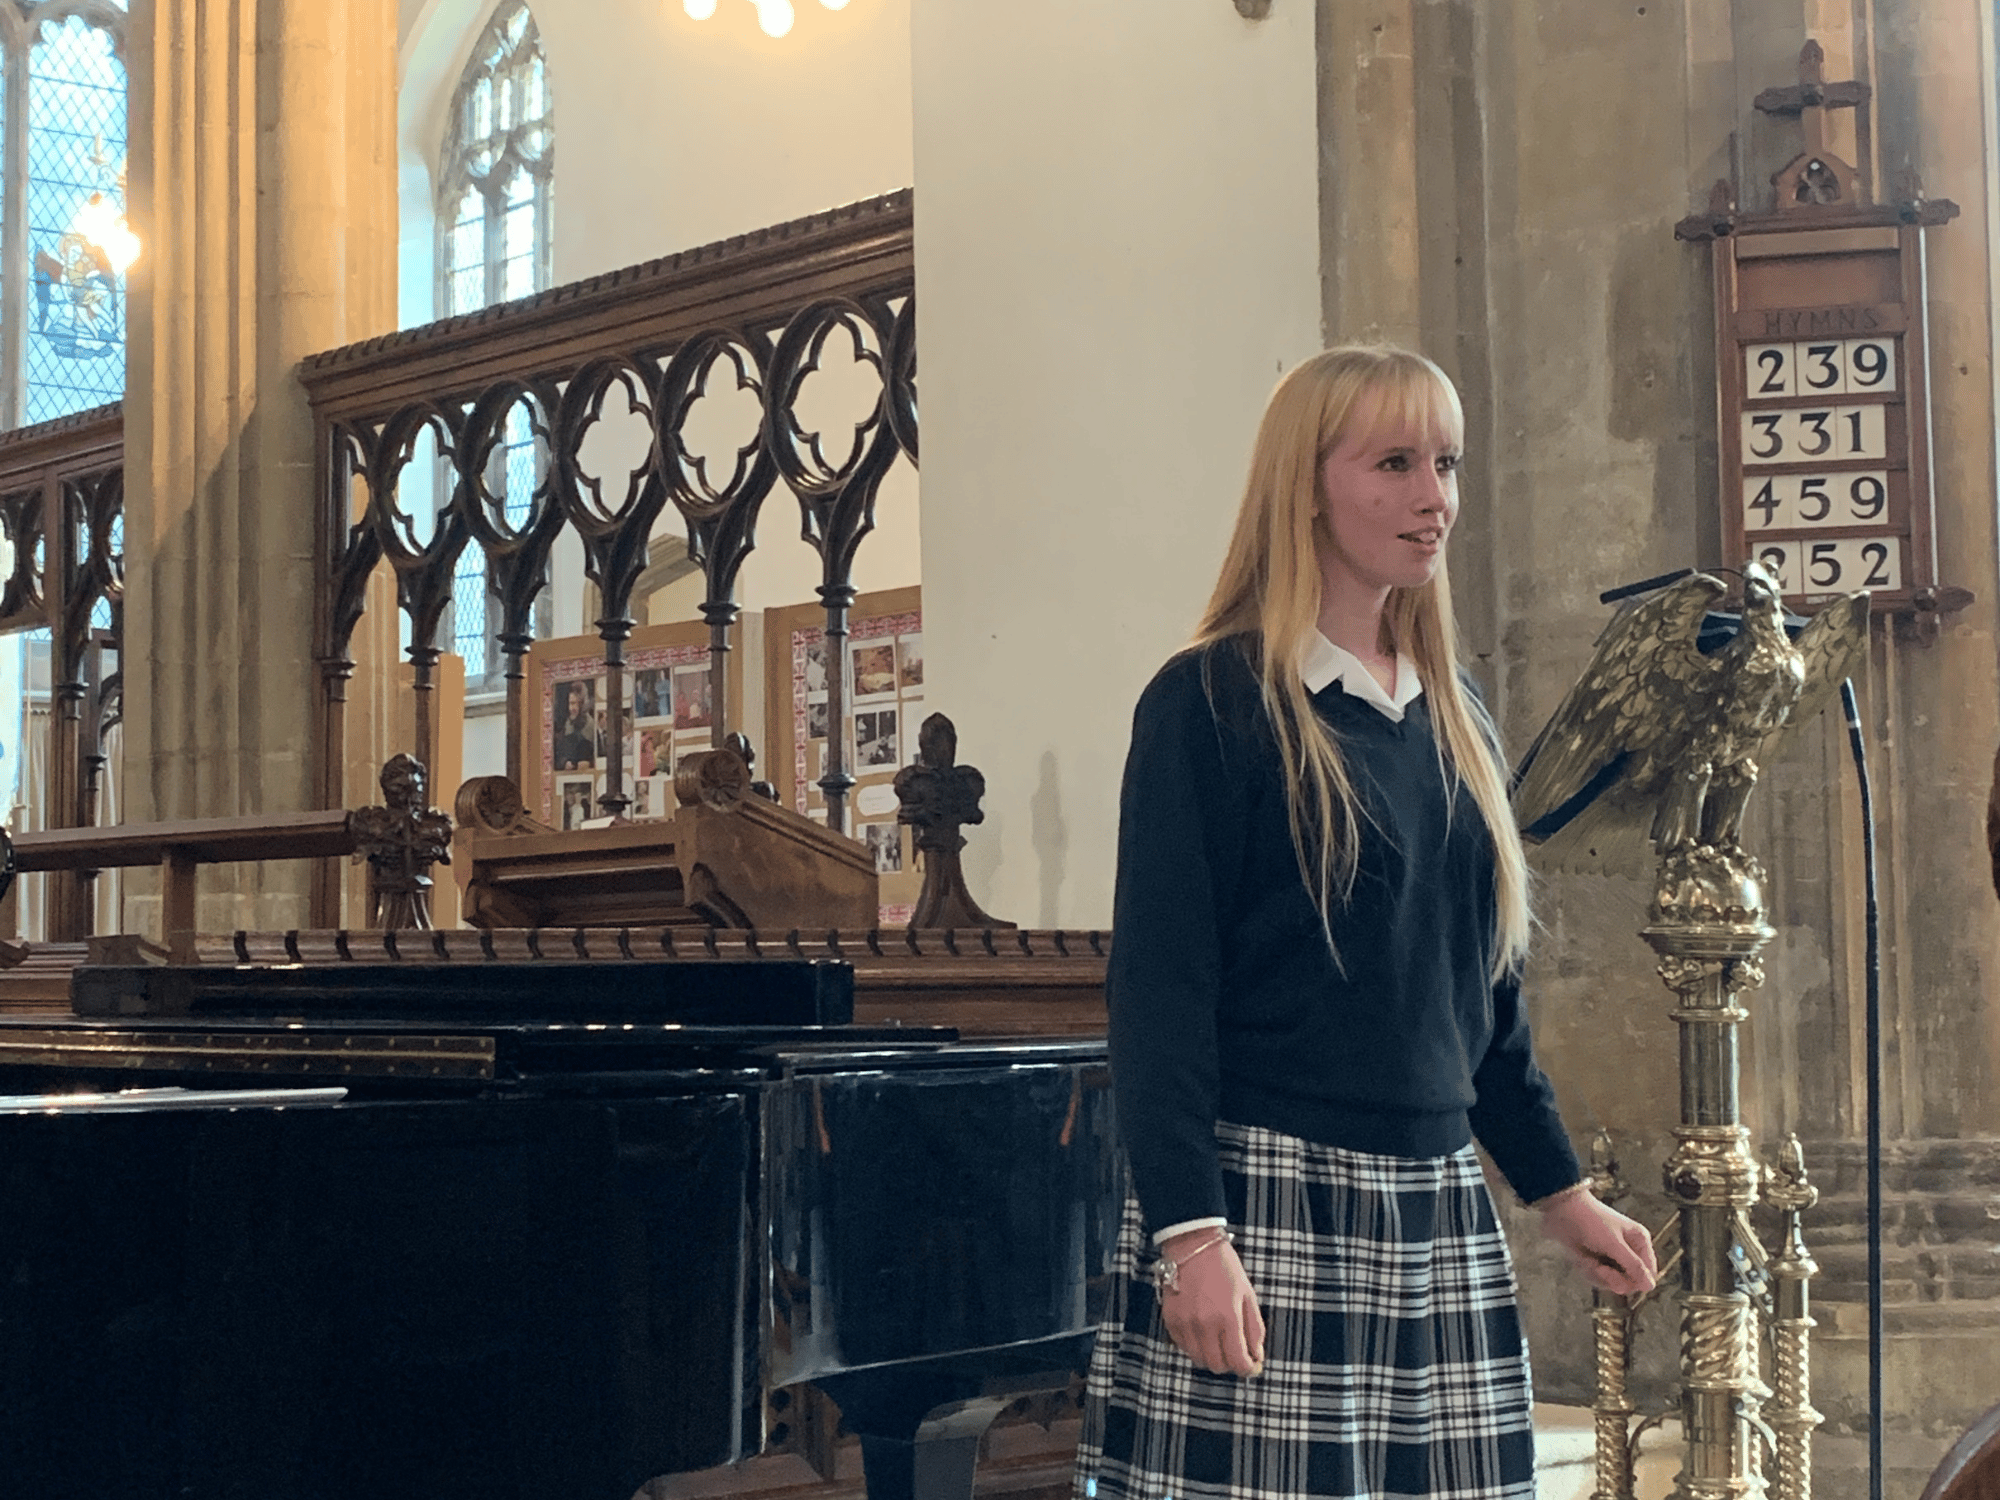 Student sings in a church